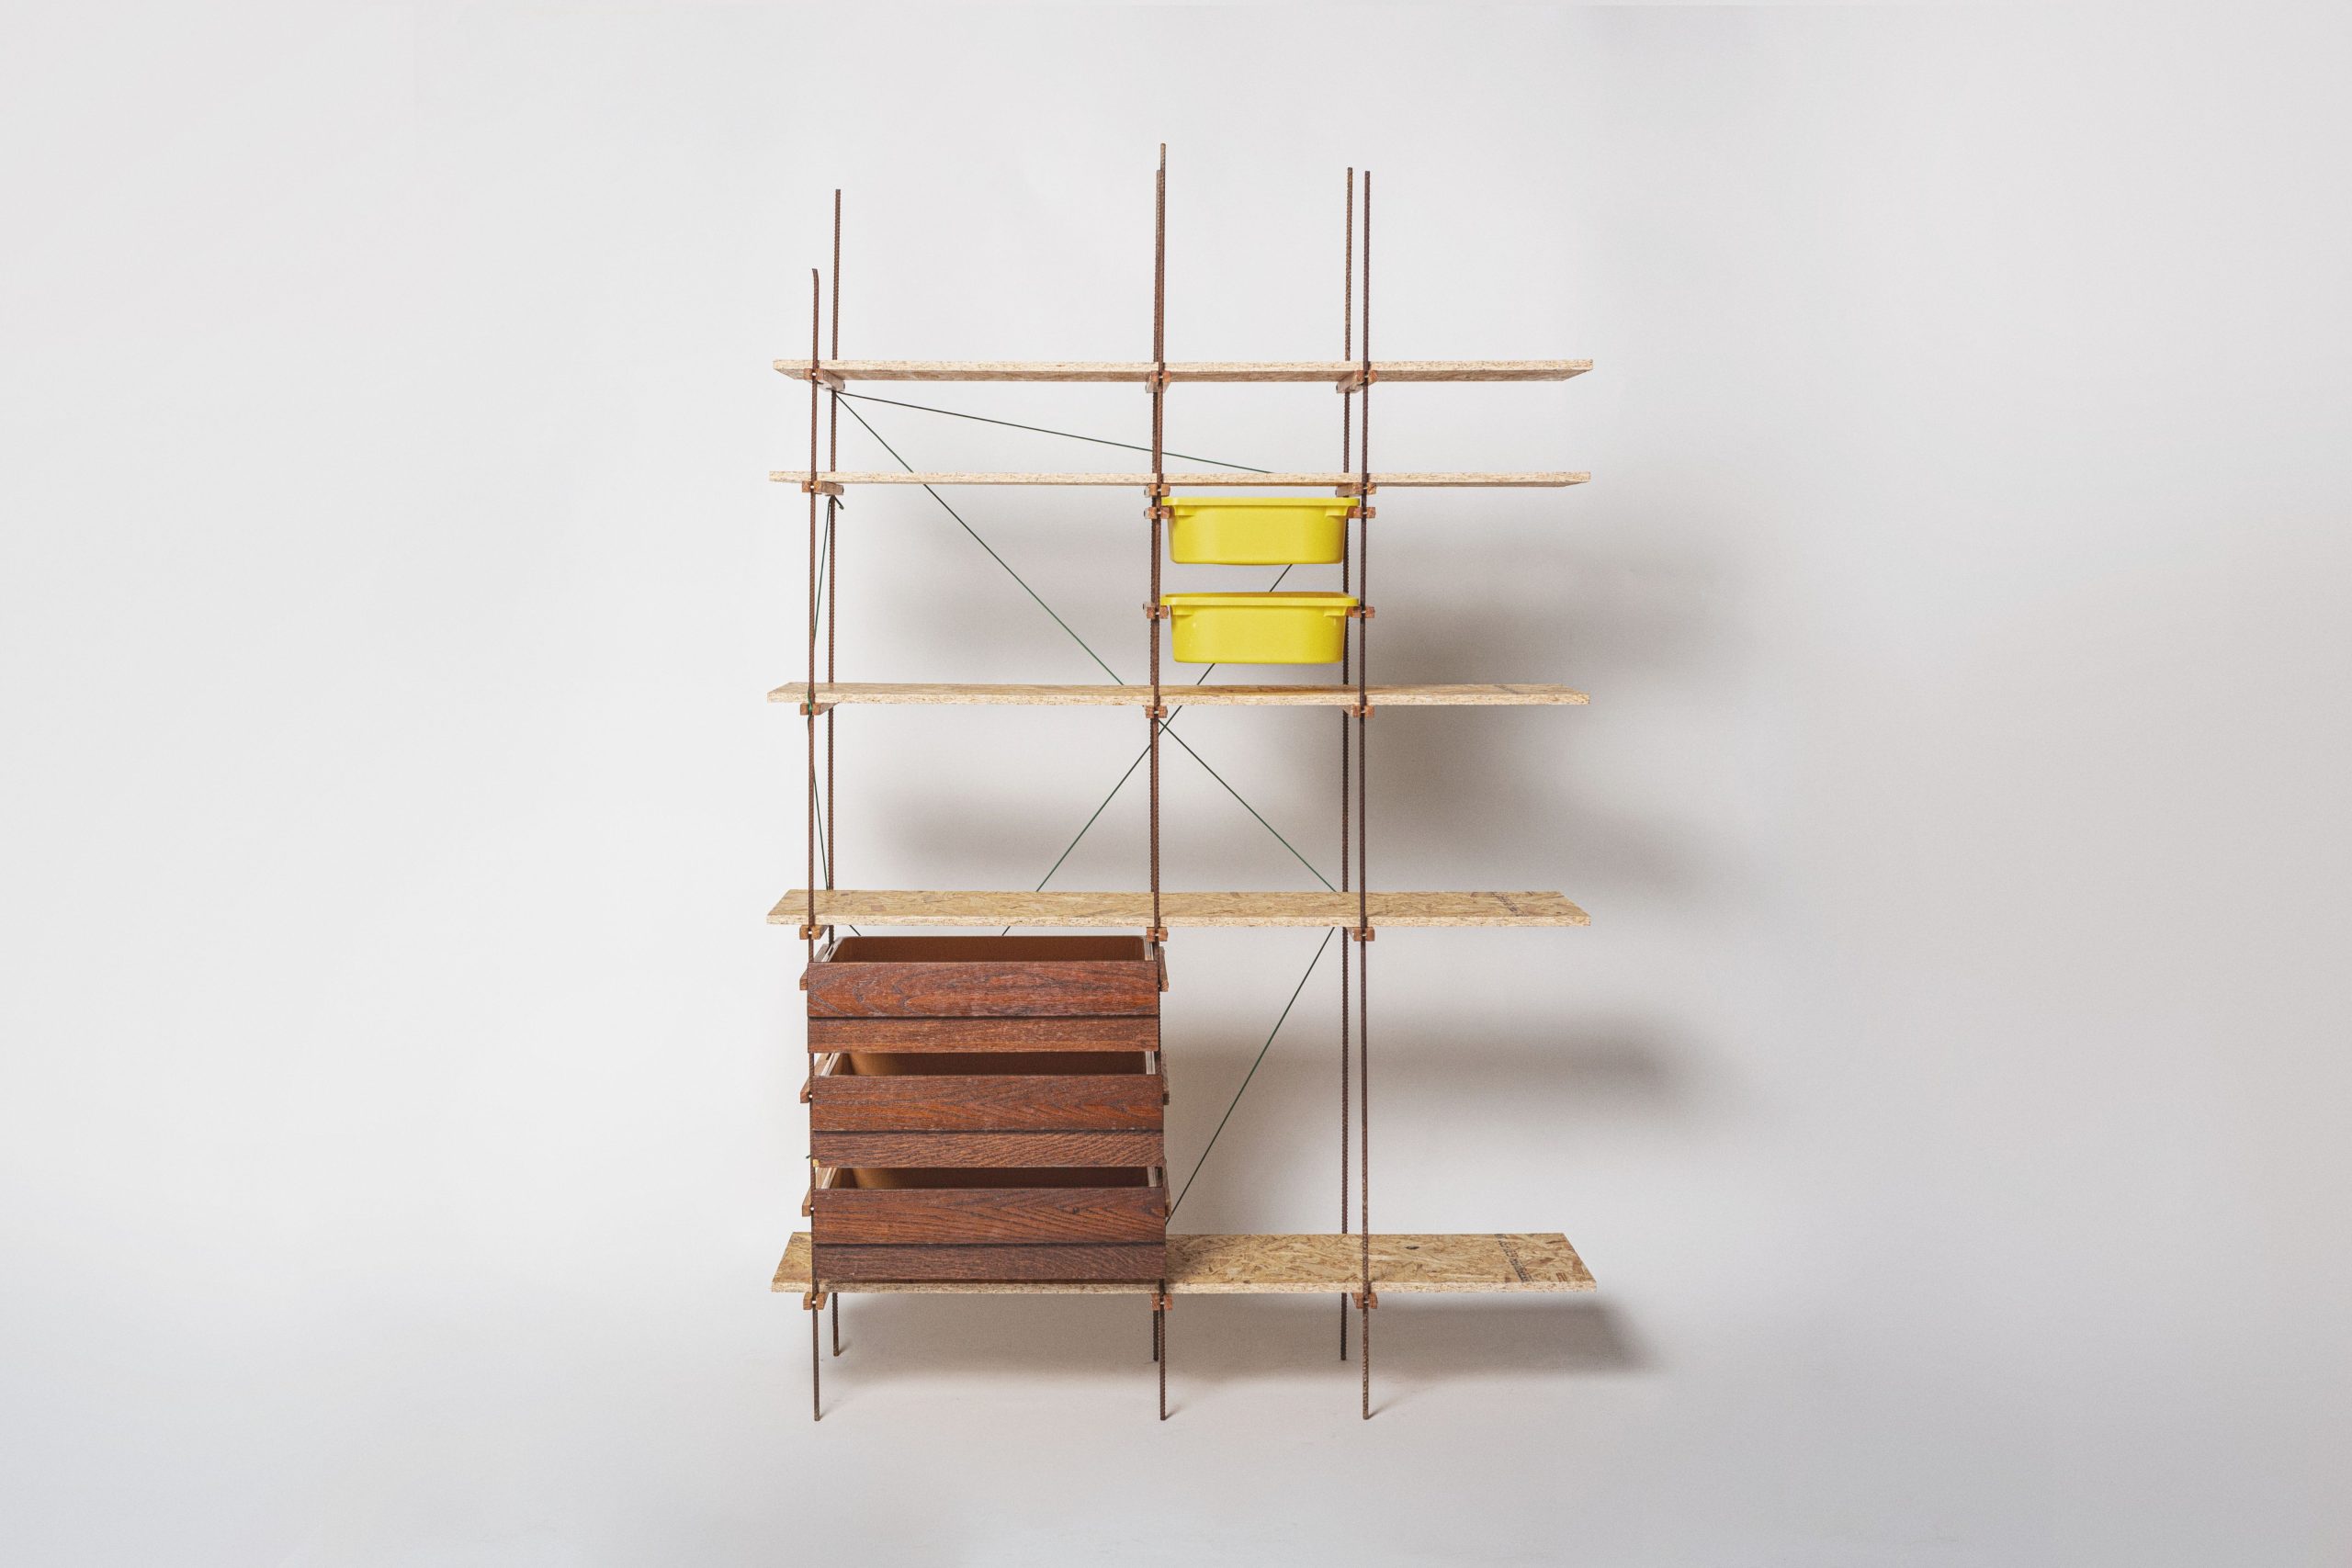 Sustainable Shelfium shelves organized in a compact design.